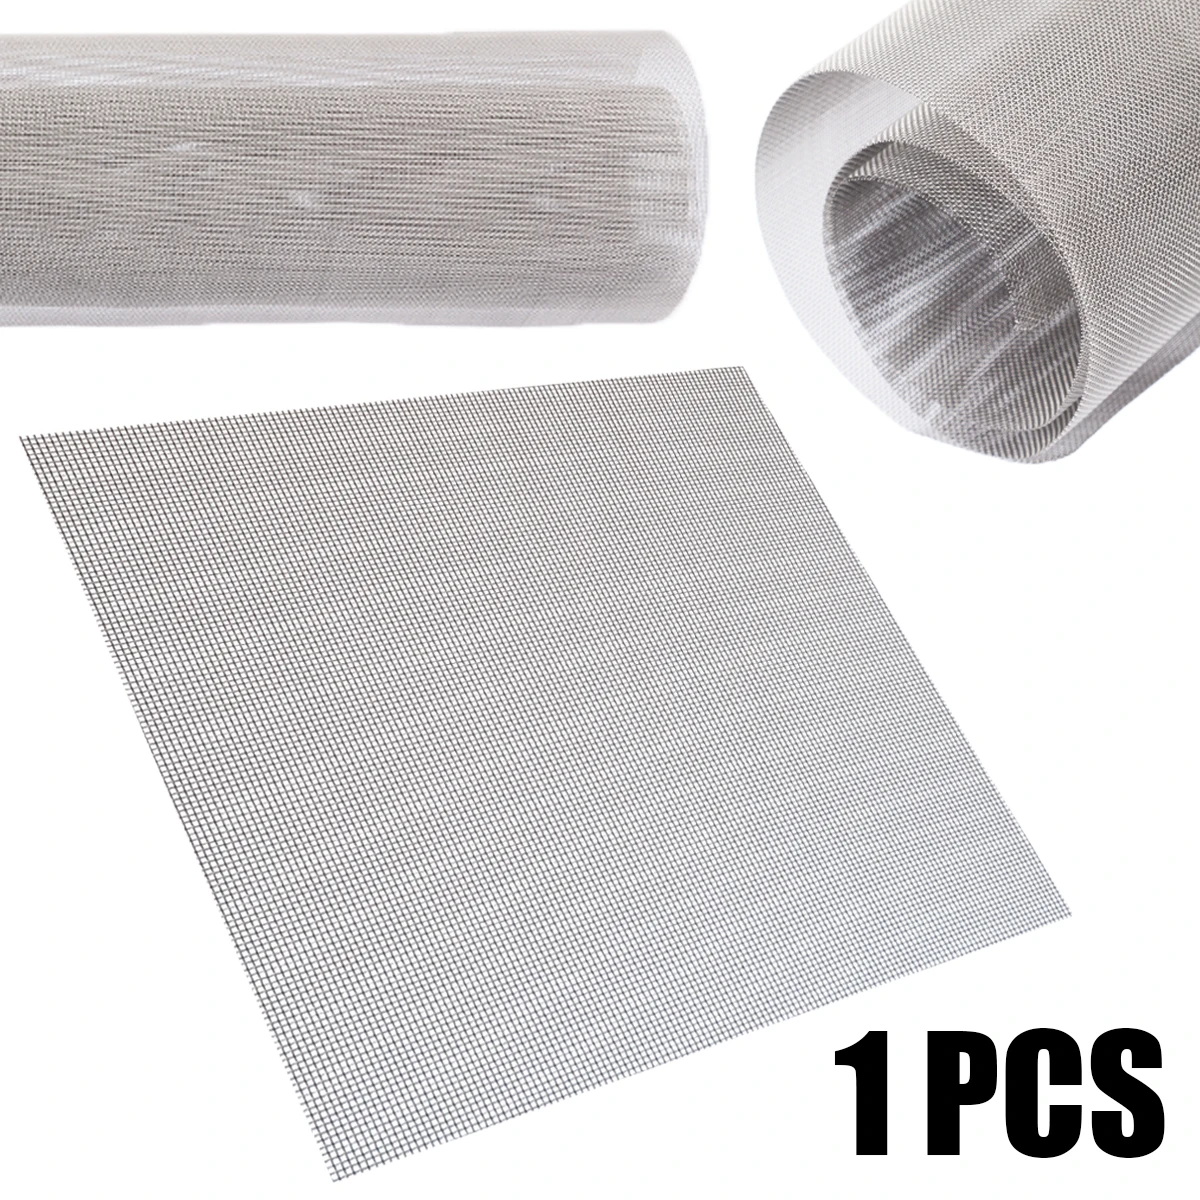 1Pcs Stainless Steel Woven Wire 30x30cm Mesh 60 Mesh Woven Wire Cloth Screen Filtration Multifunctional Filter Woven Wire